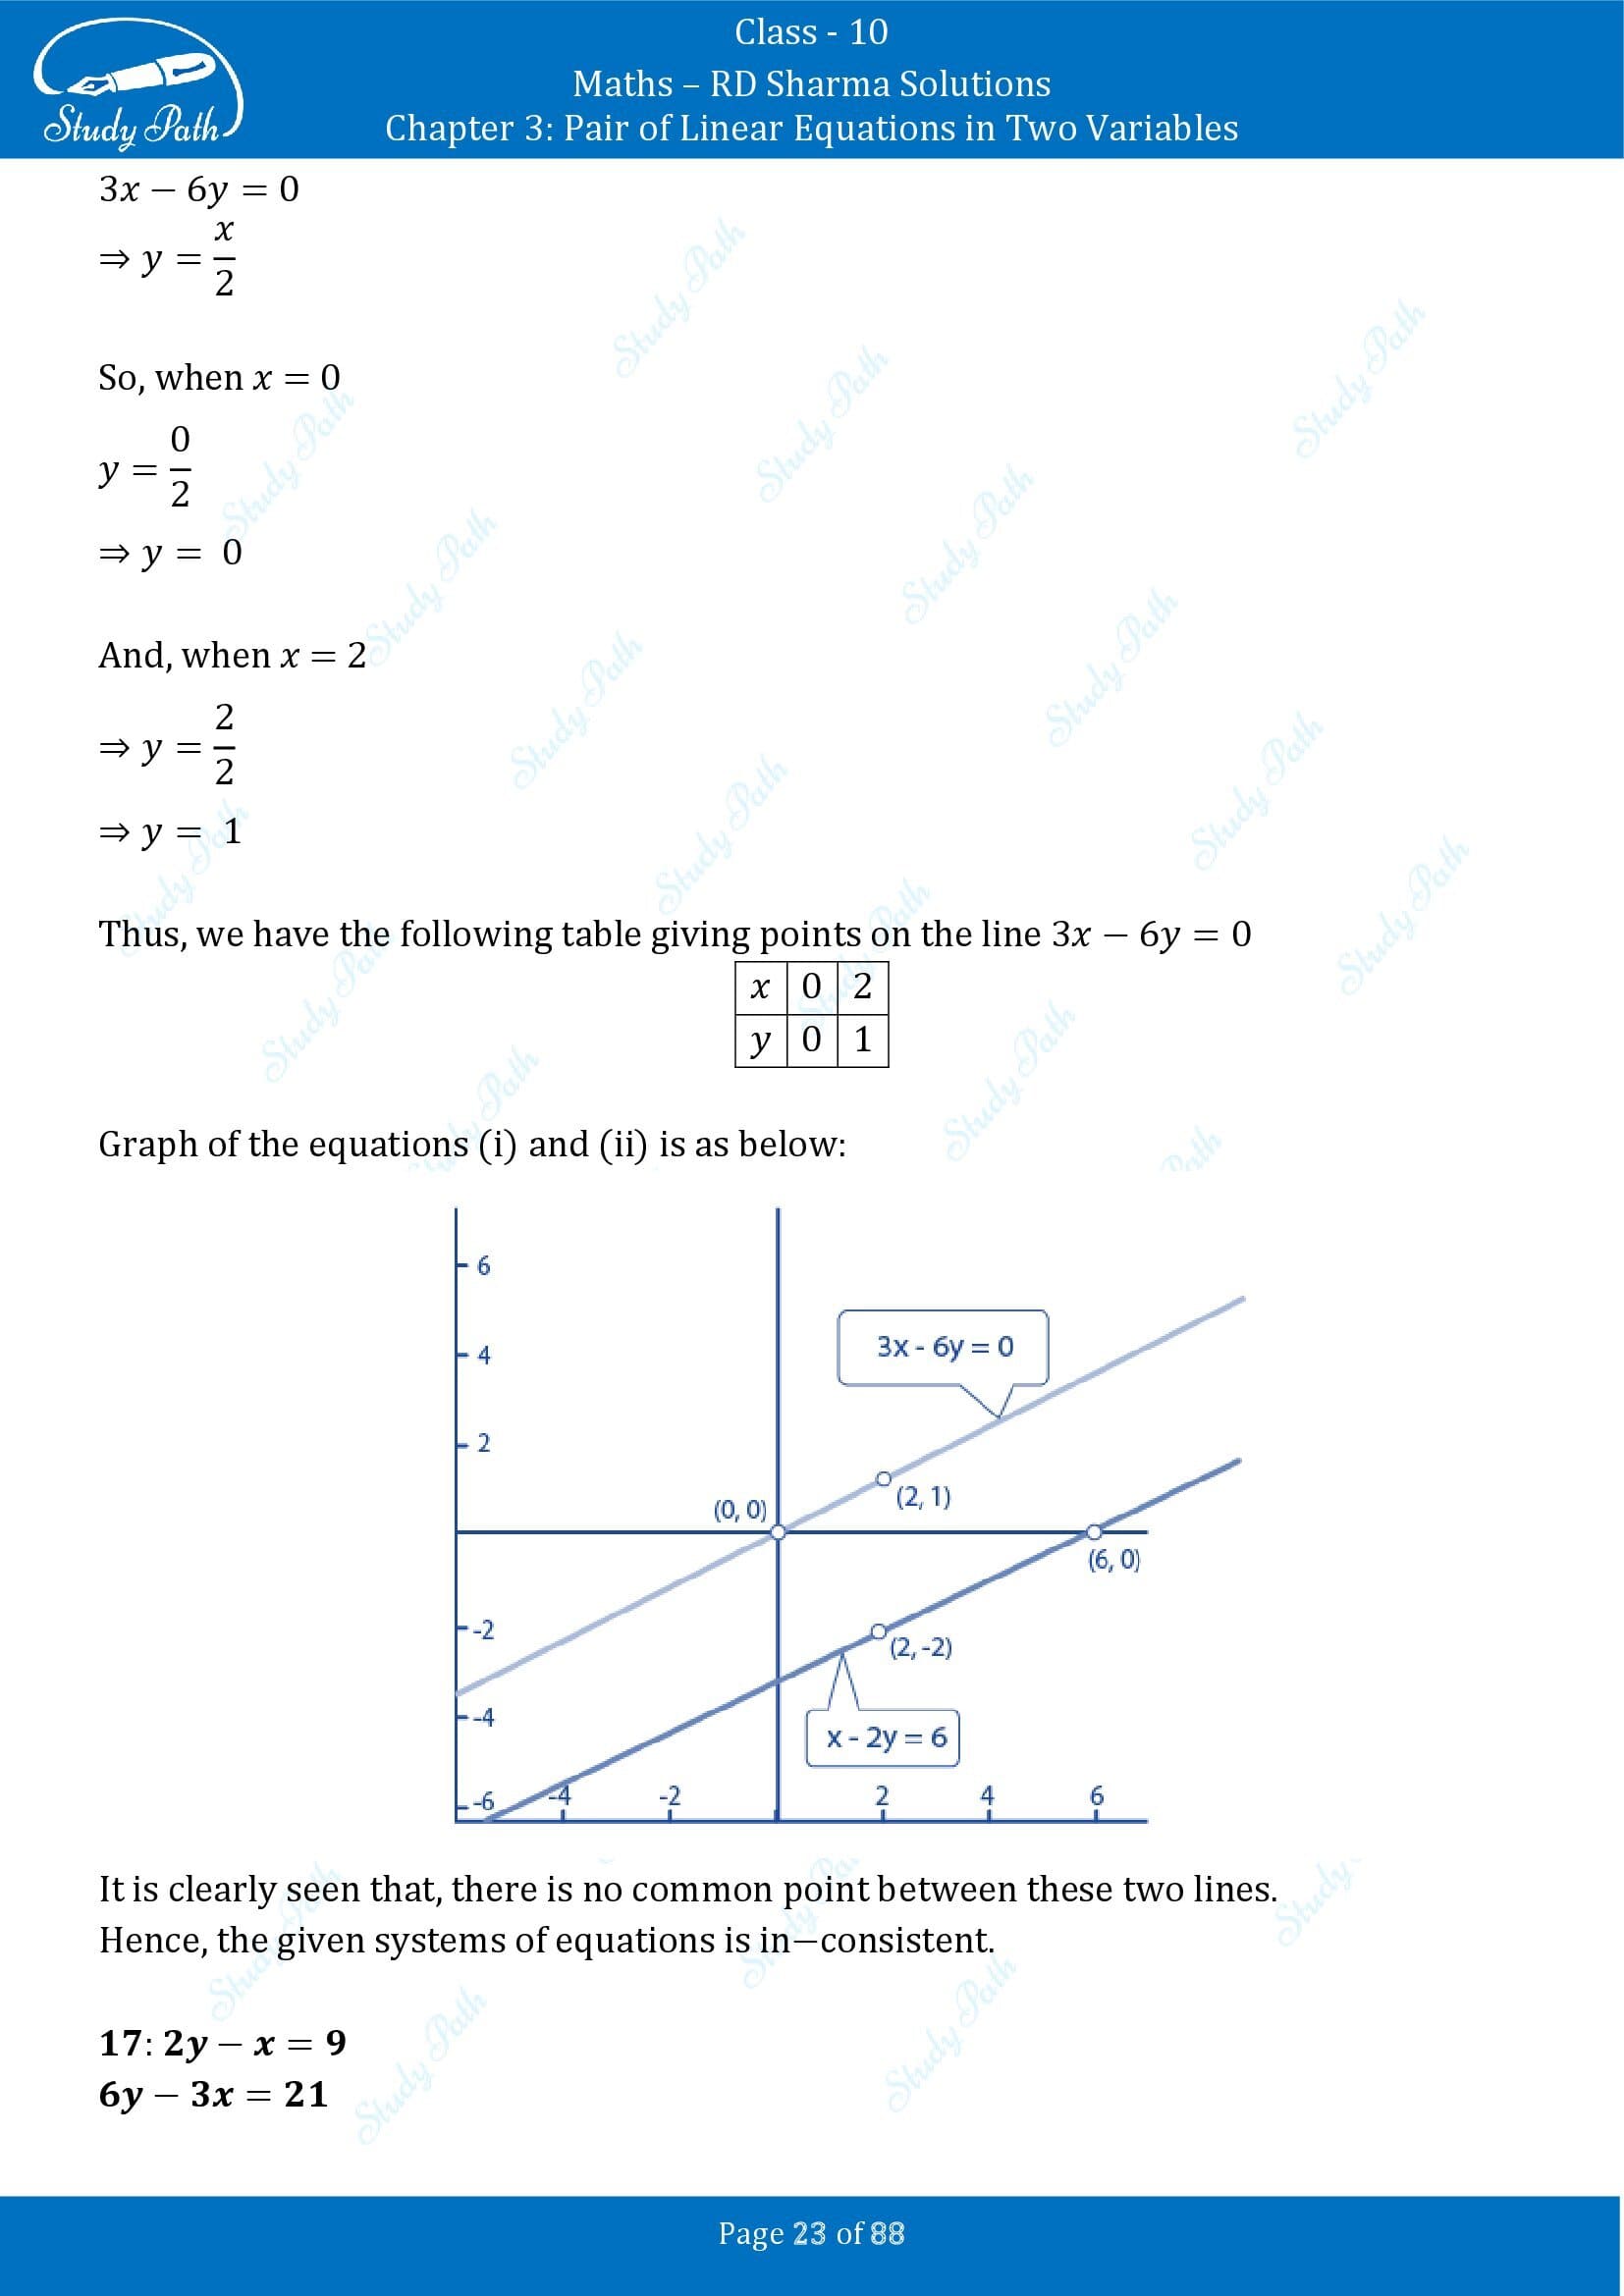 RD Sharma Solutions Class 10 Chapter 3 Pair of Linear Equations in Two Variables Exercise 3.2 00023